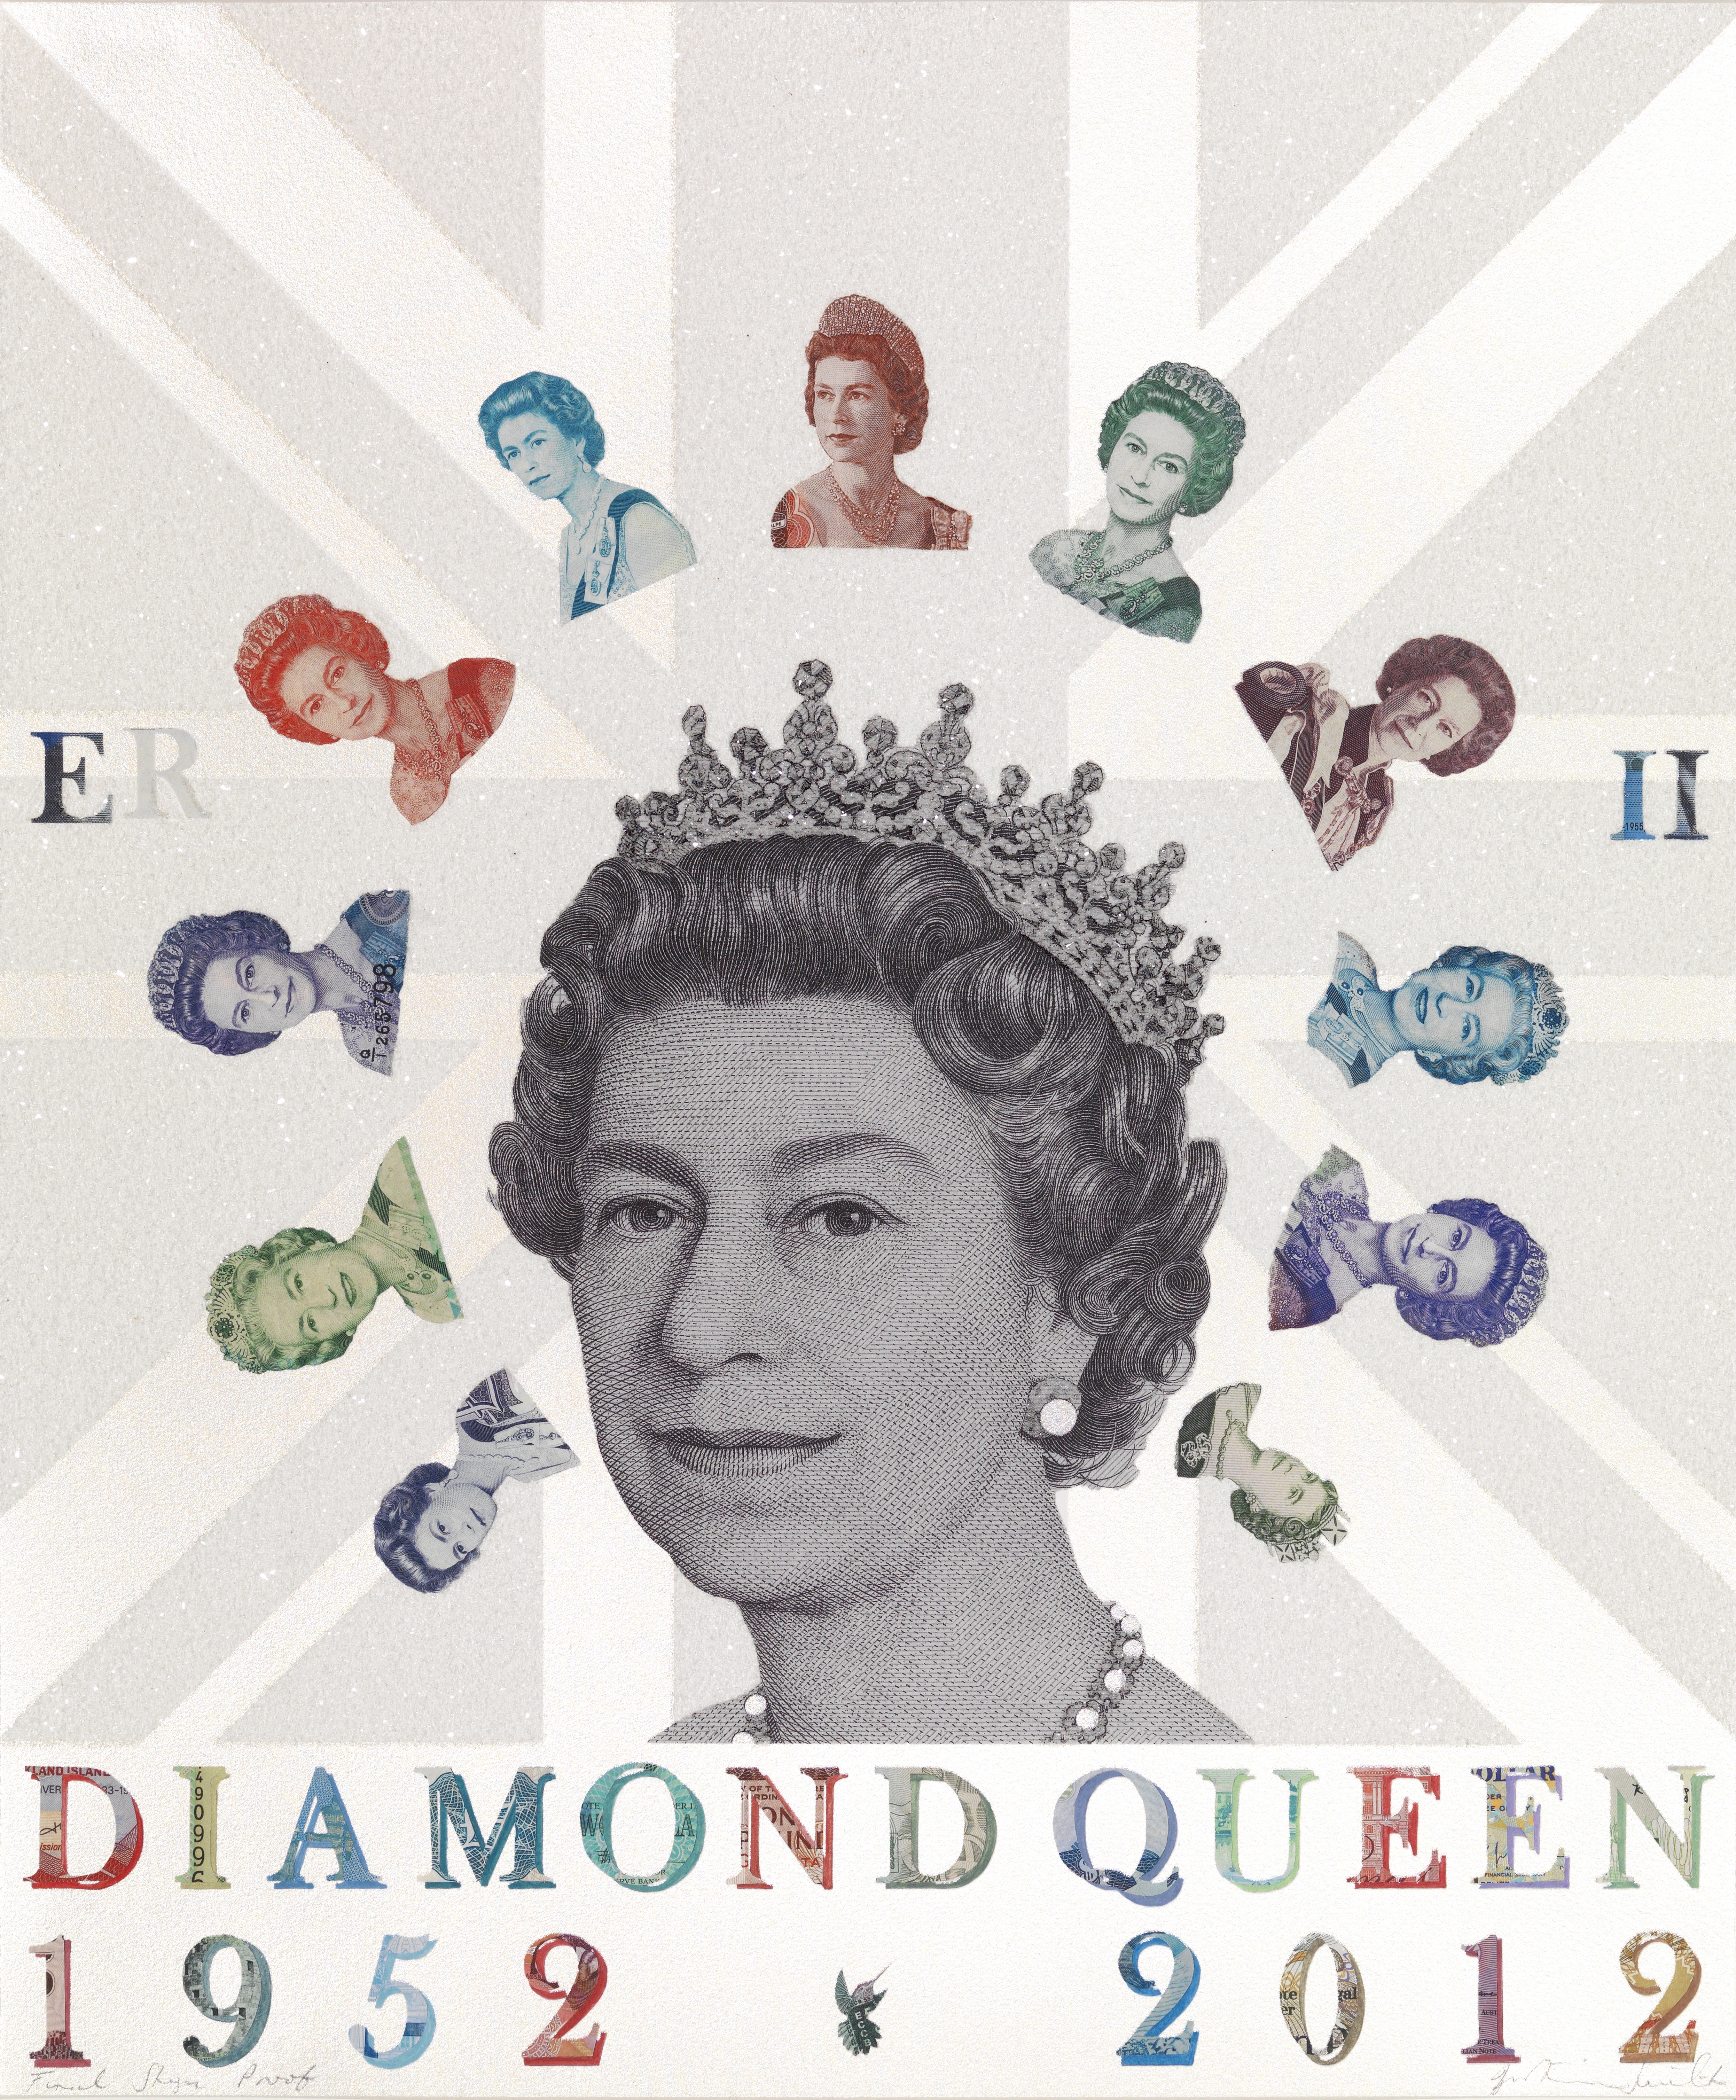 Diamond Queen - a limited edition print by Justine Smith, London